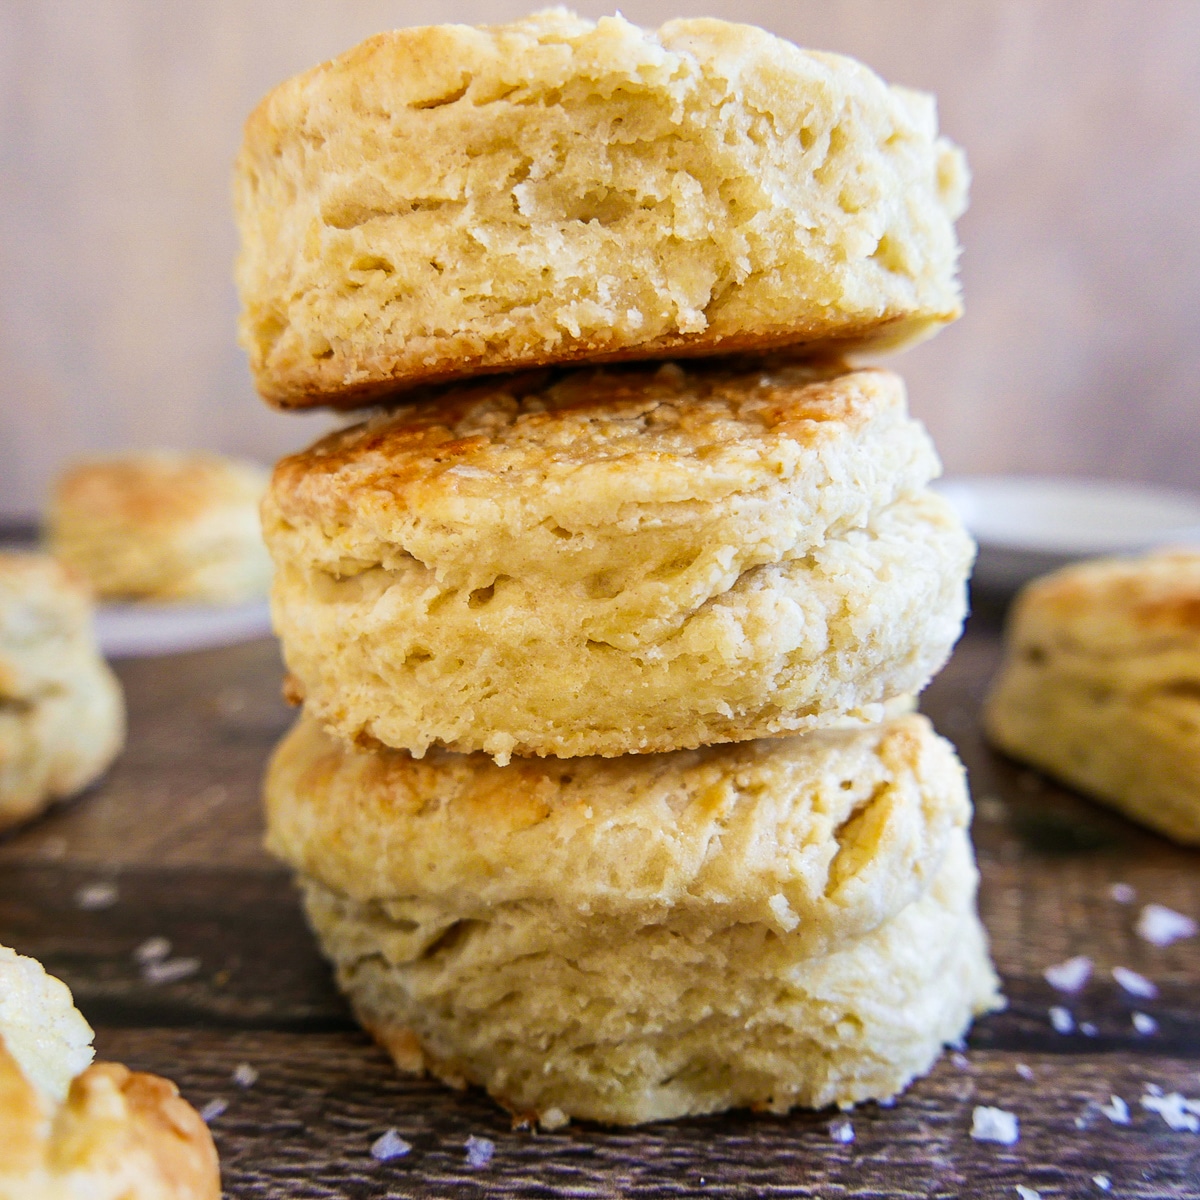 Three biscuits stacked on a wooden table with more biscuits in background.